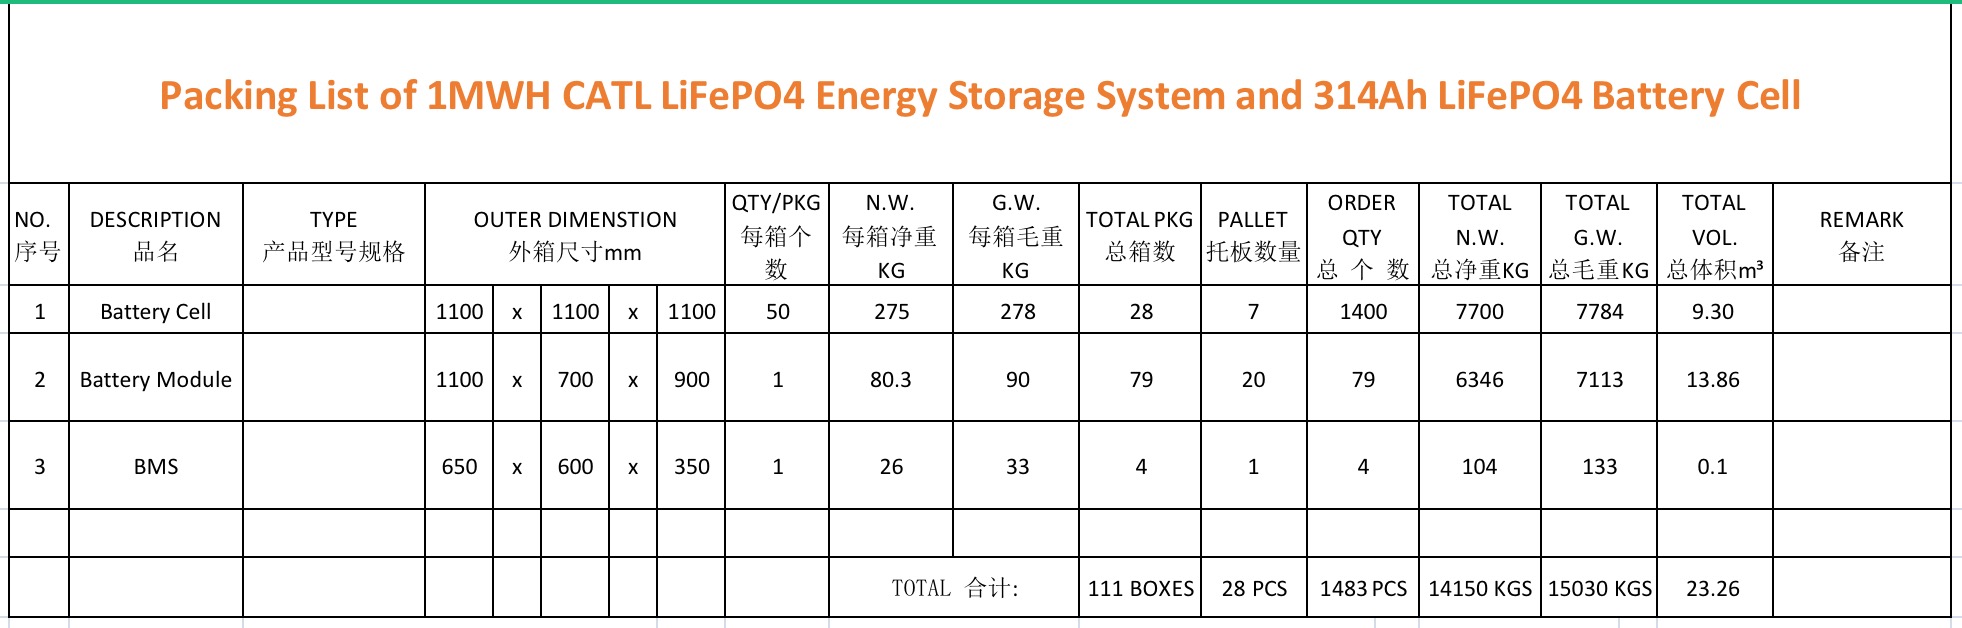 Packing List of 1MWH CATL LiFePO4 Energy Storage System and 314Ah LiFePO4 Battery Cell